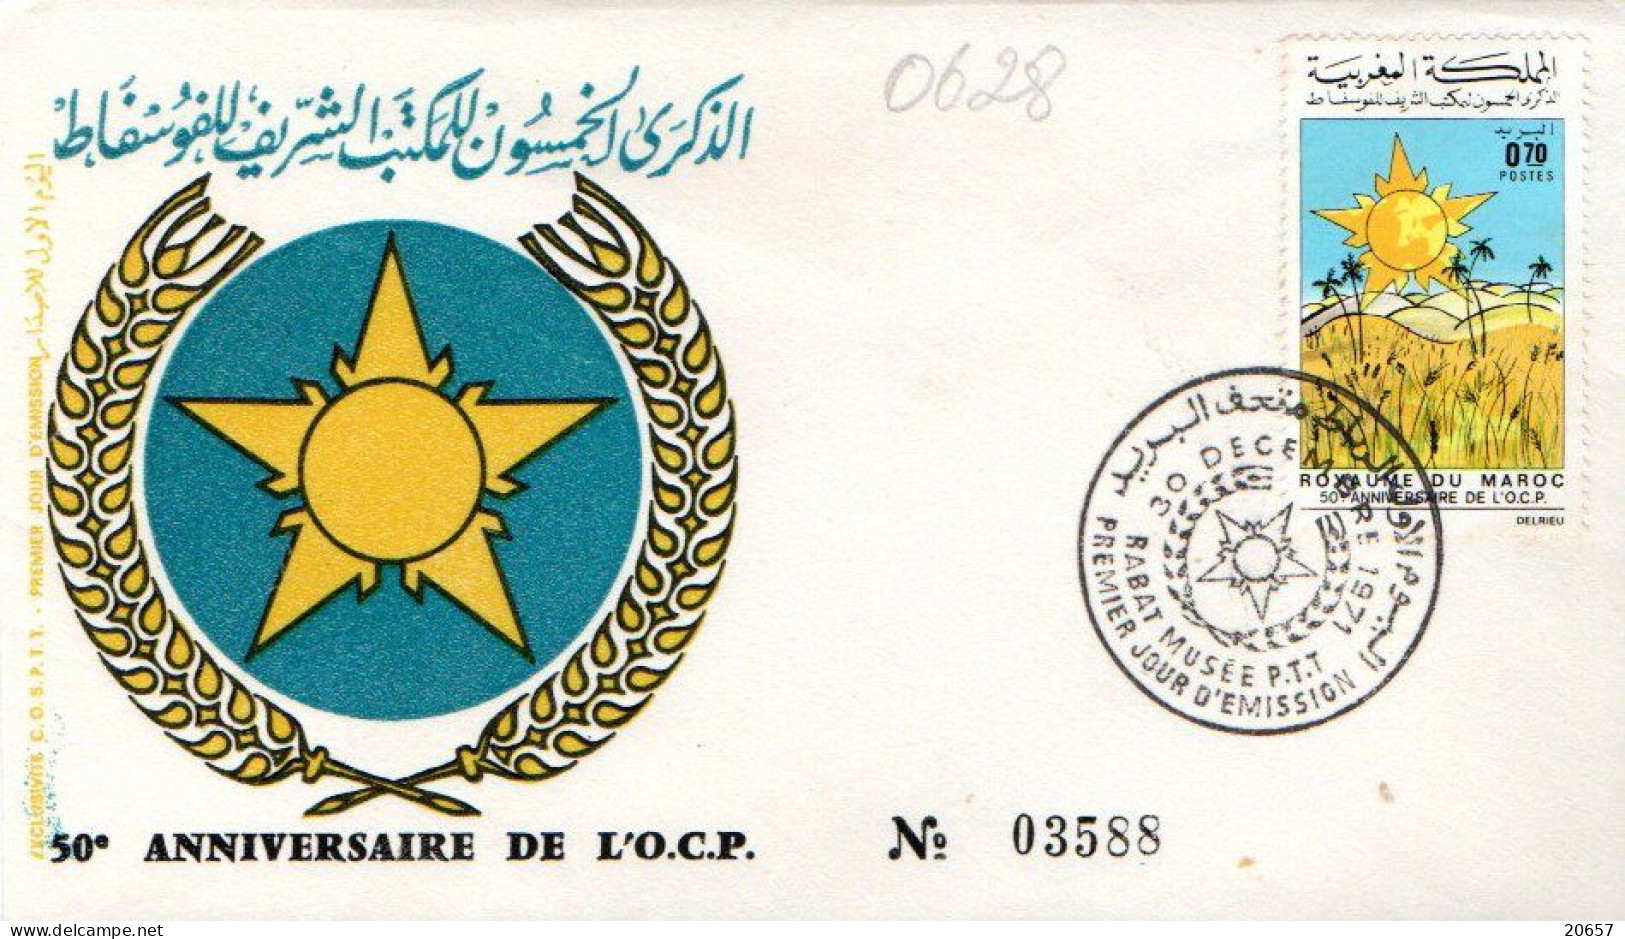 Maroc Al Maghrib 0628 Fdc Phosphates, Agriculture - Minerales